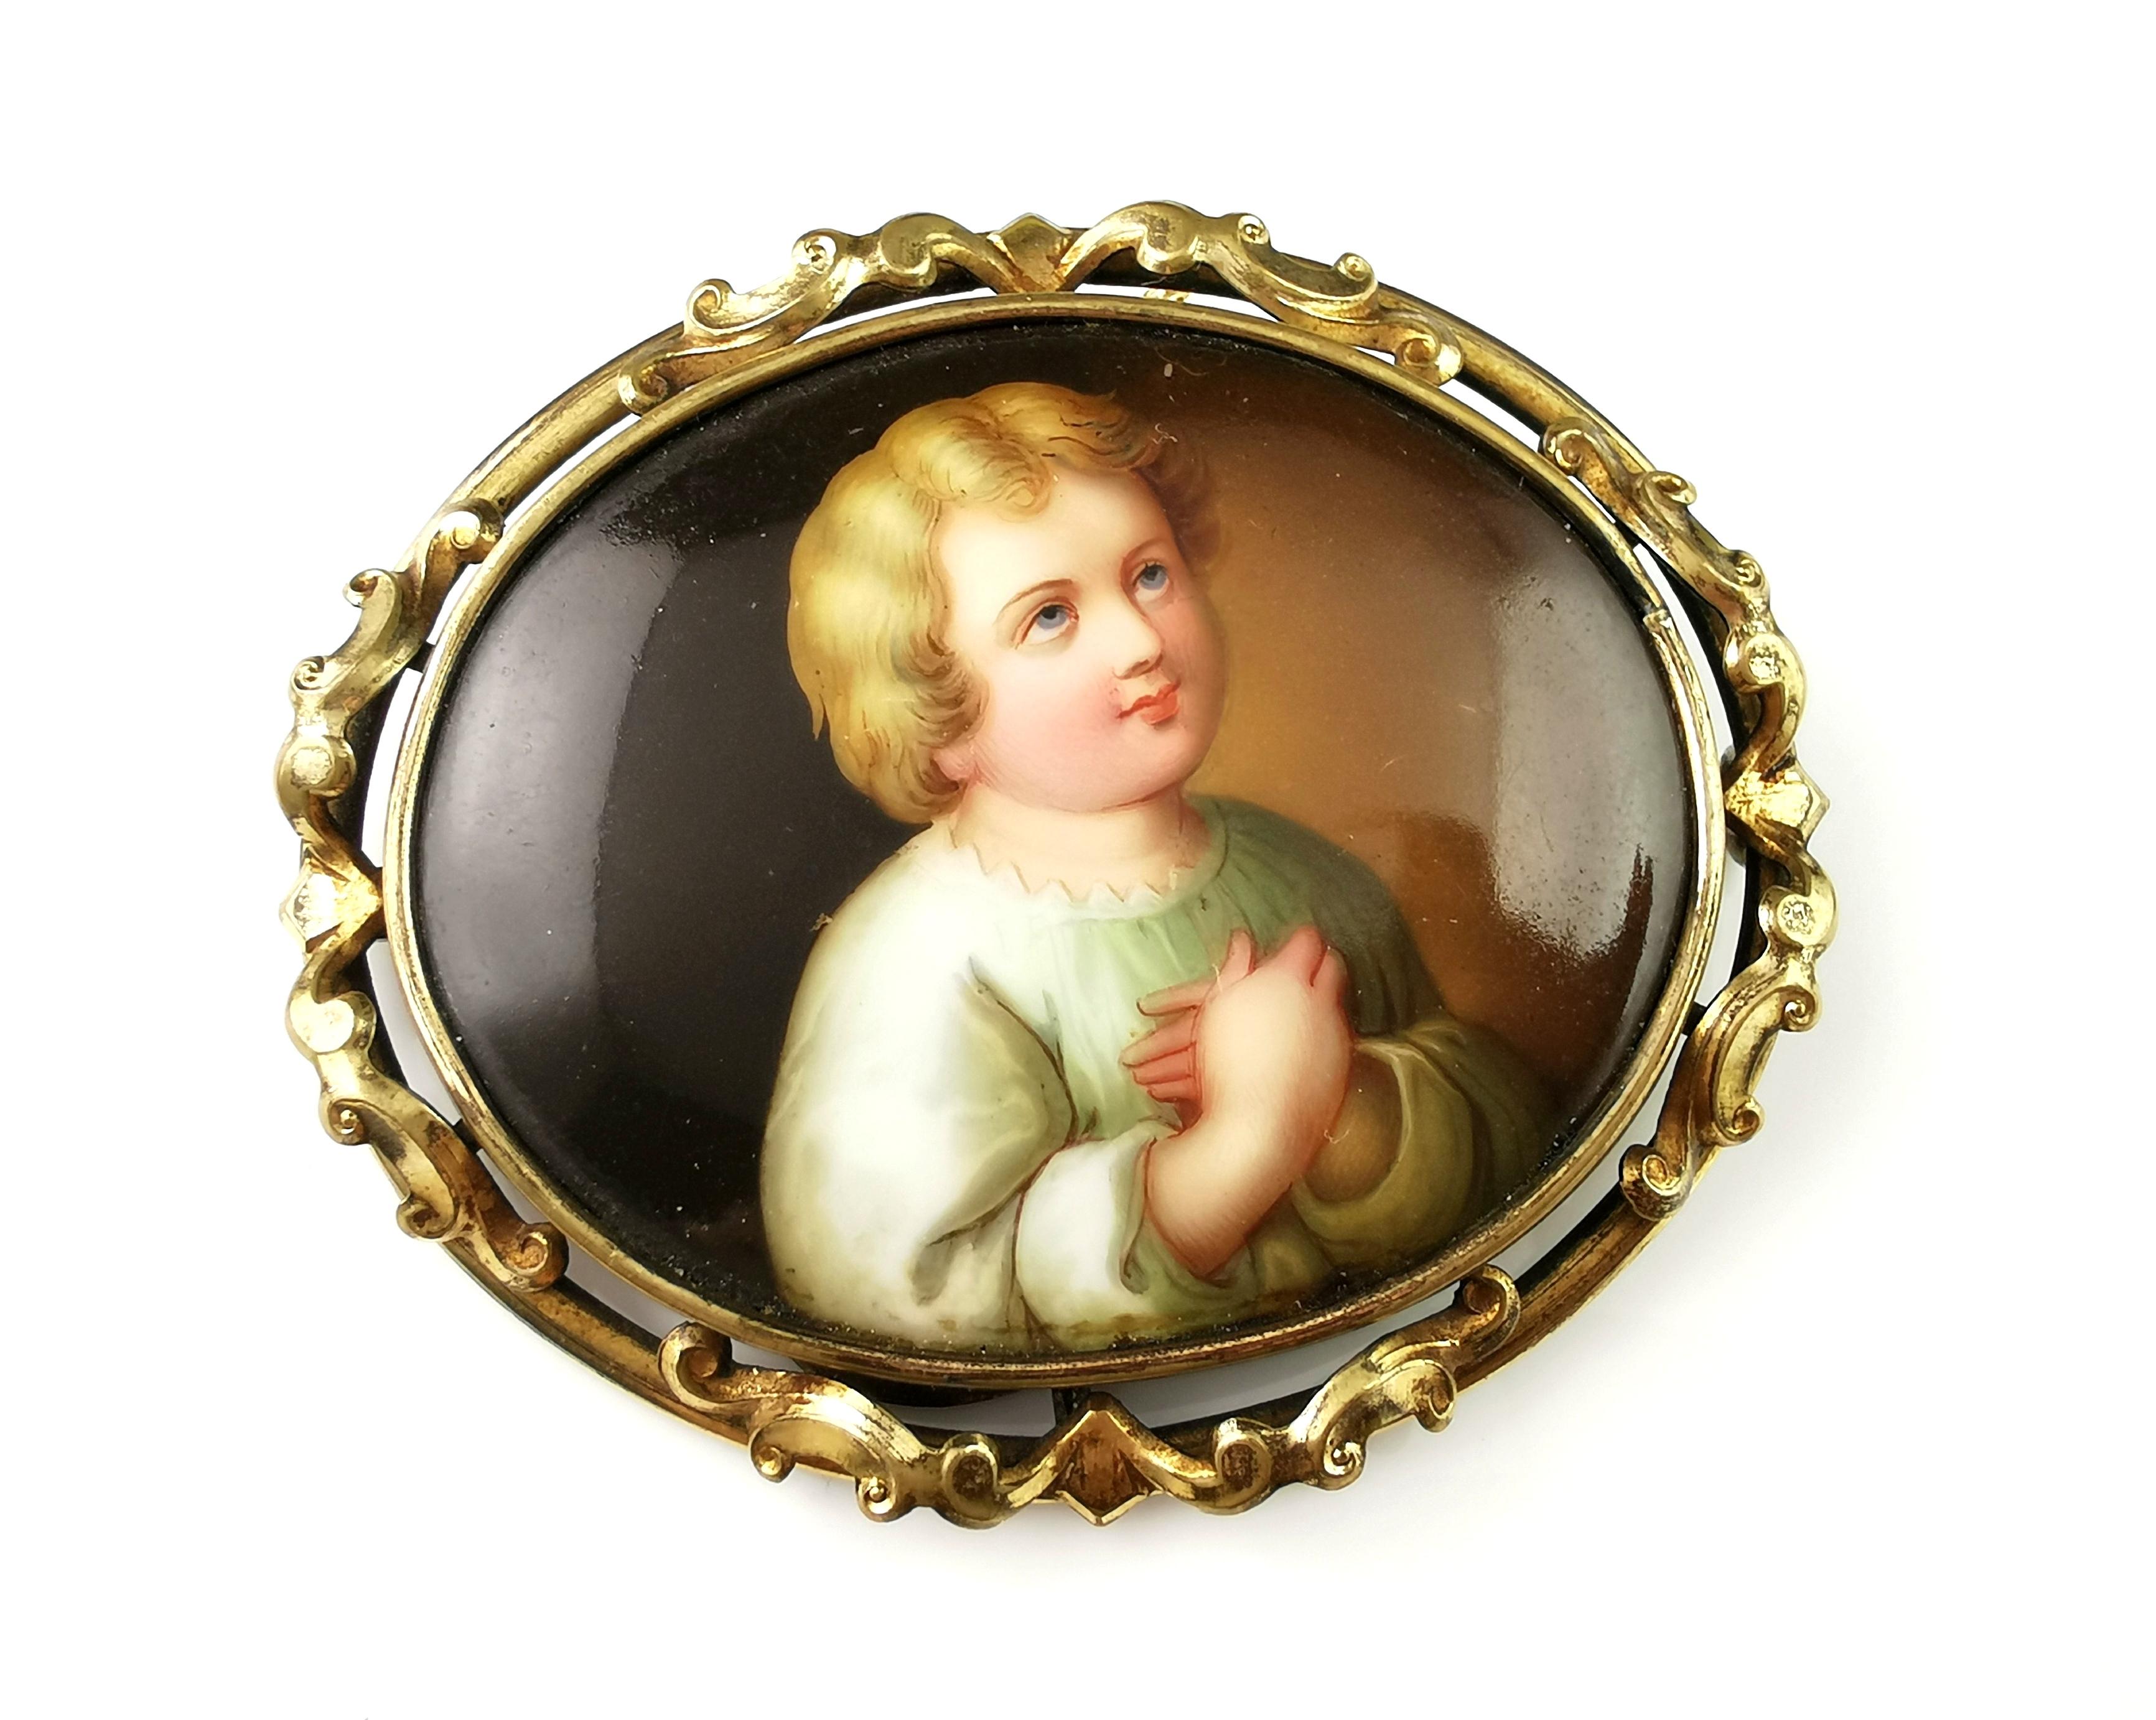 A fine antique Victorian era hand enamelled porcelain brooch.

The brooch is an oval shape with a hand painted porcelain plaque to the centre featuring an angelic child or a Putti.

It is housed in a decorative gilt bronze mount and has an old c